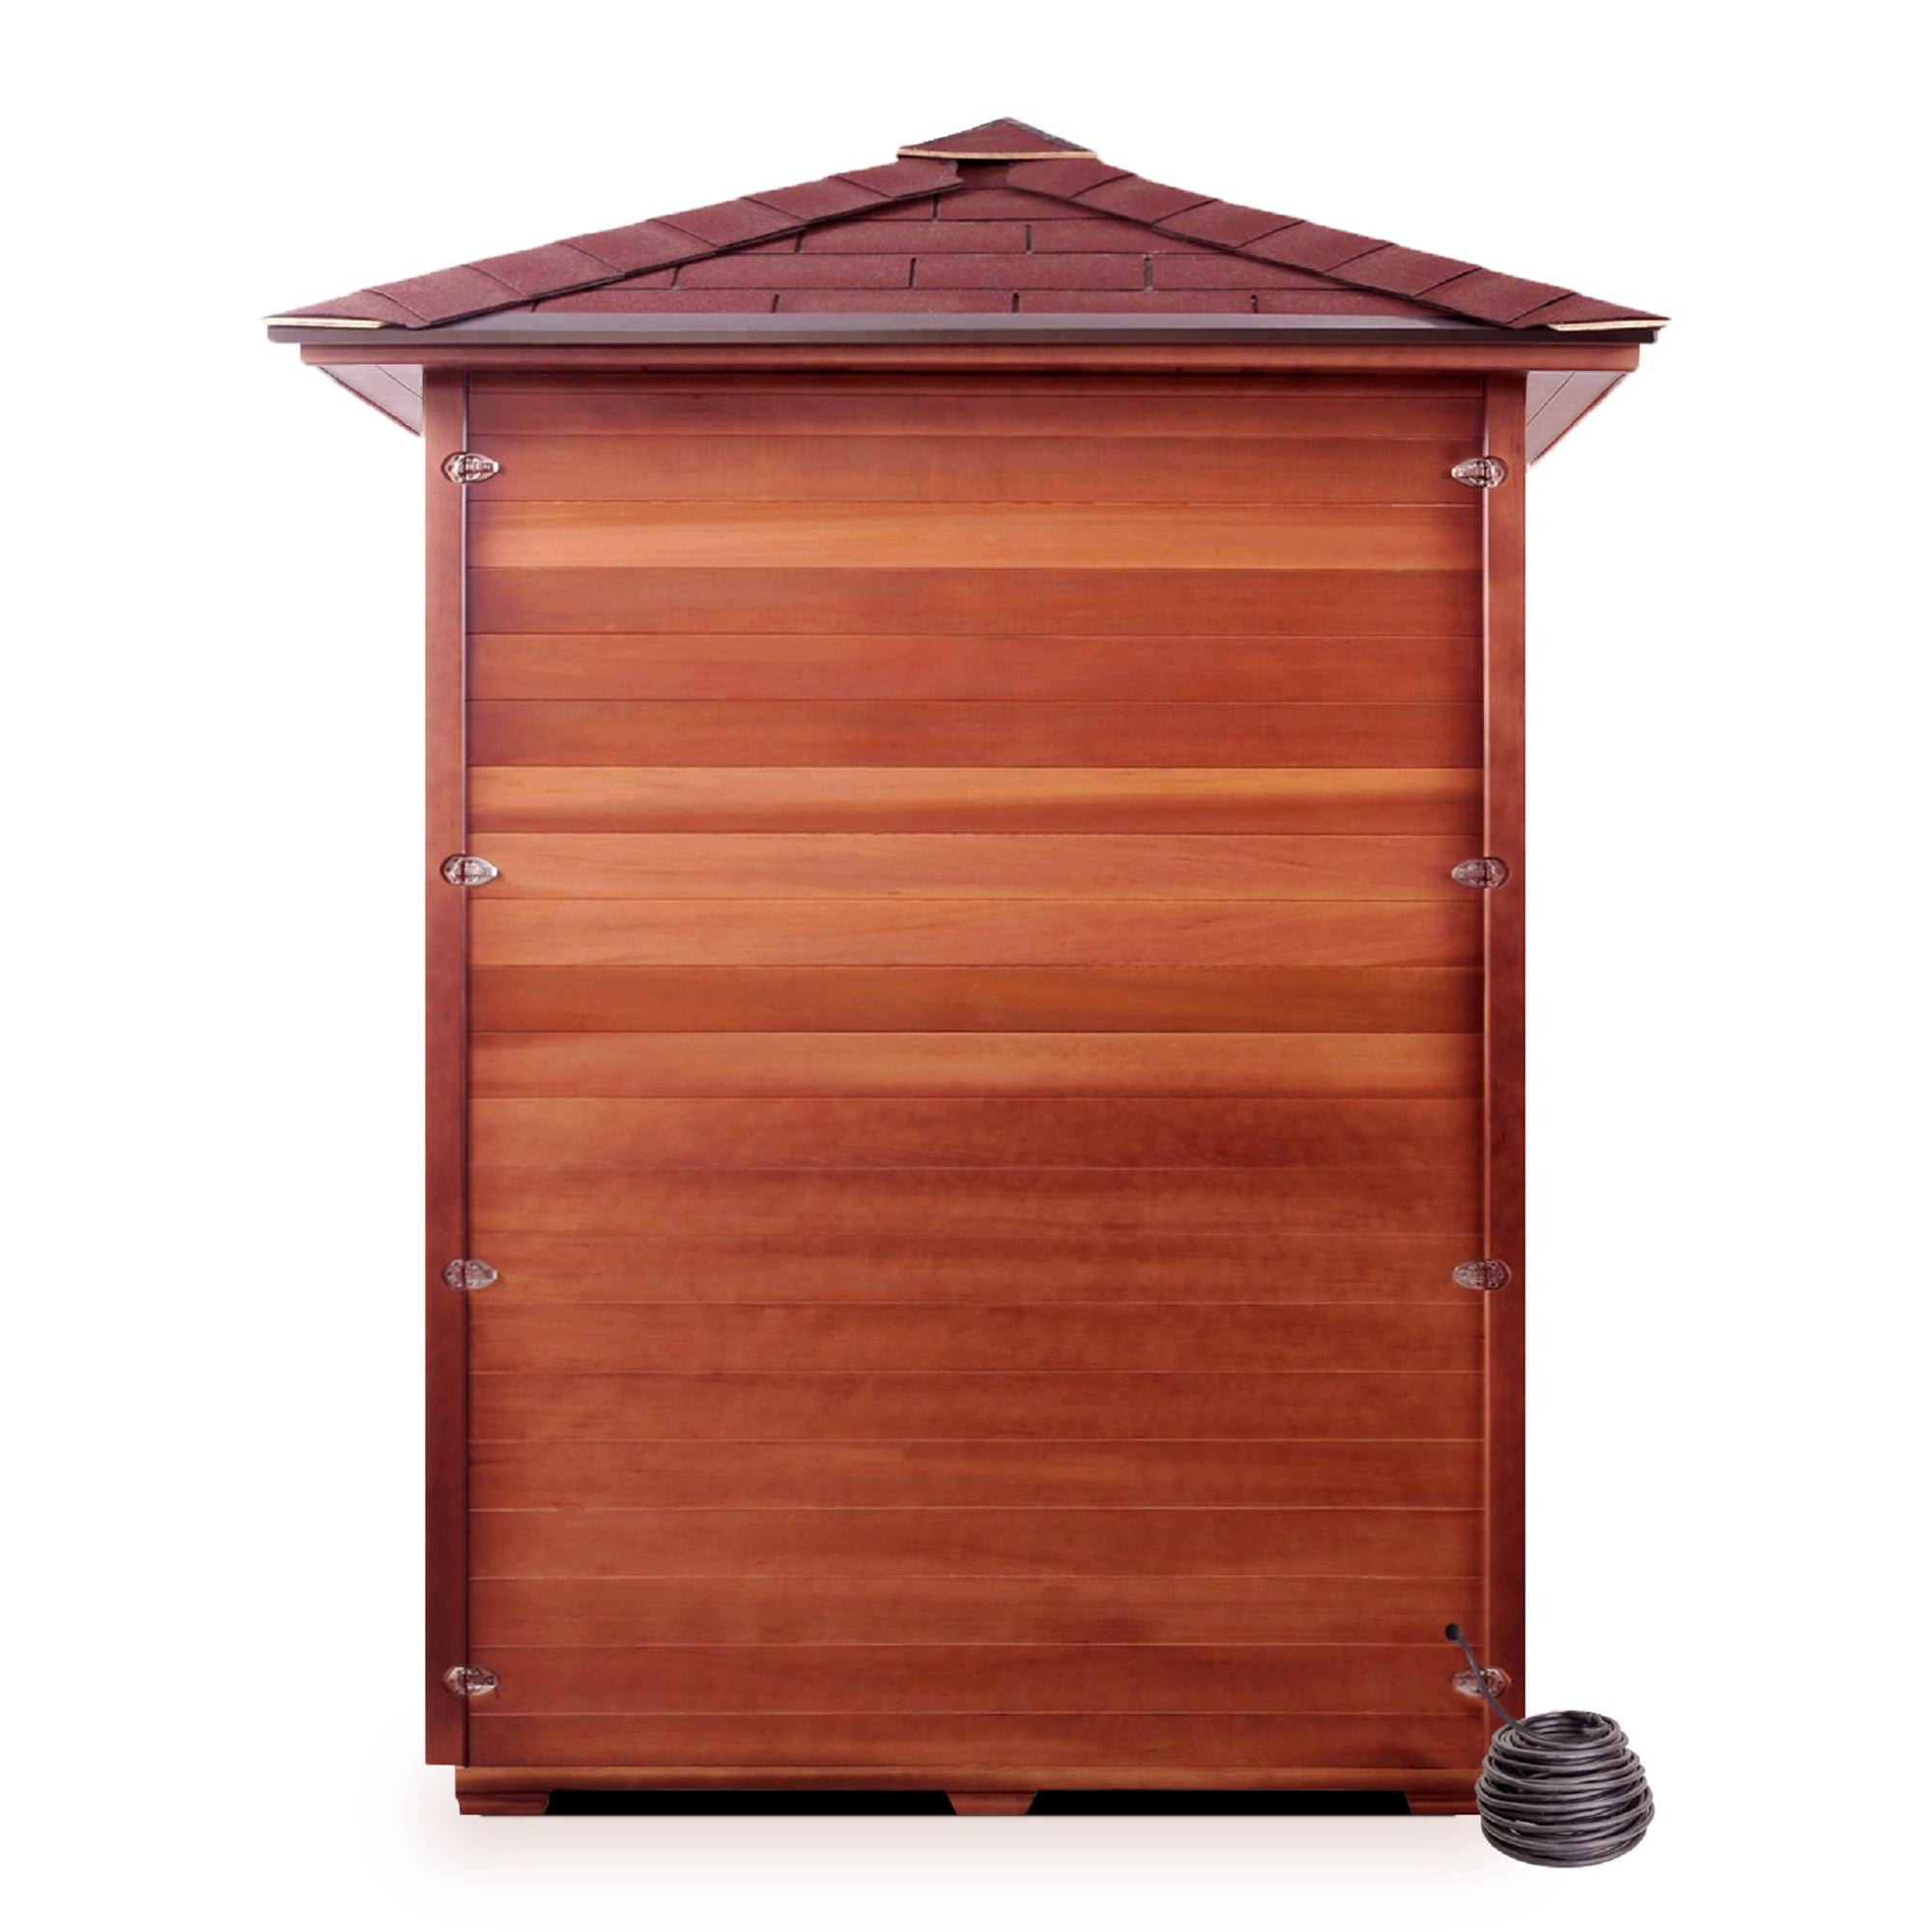 Enlighten Sauna Dry traditional SunRise Outdoor Canadian Red Cedar Wood Outside And Inside Peak Roofed with  glass door and window  two person sauna front view